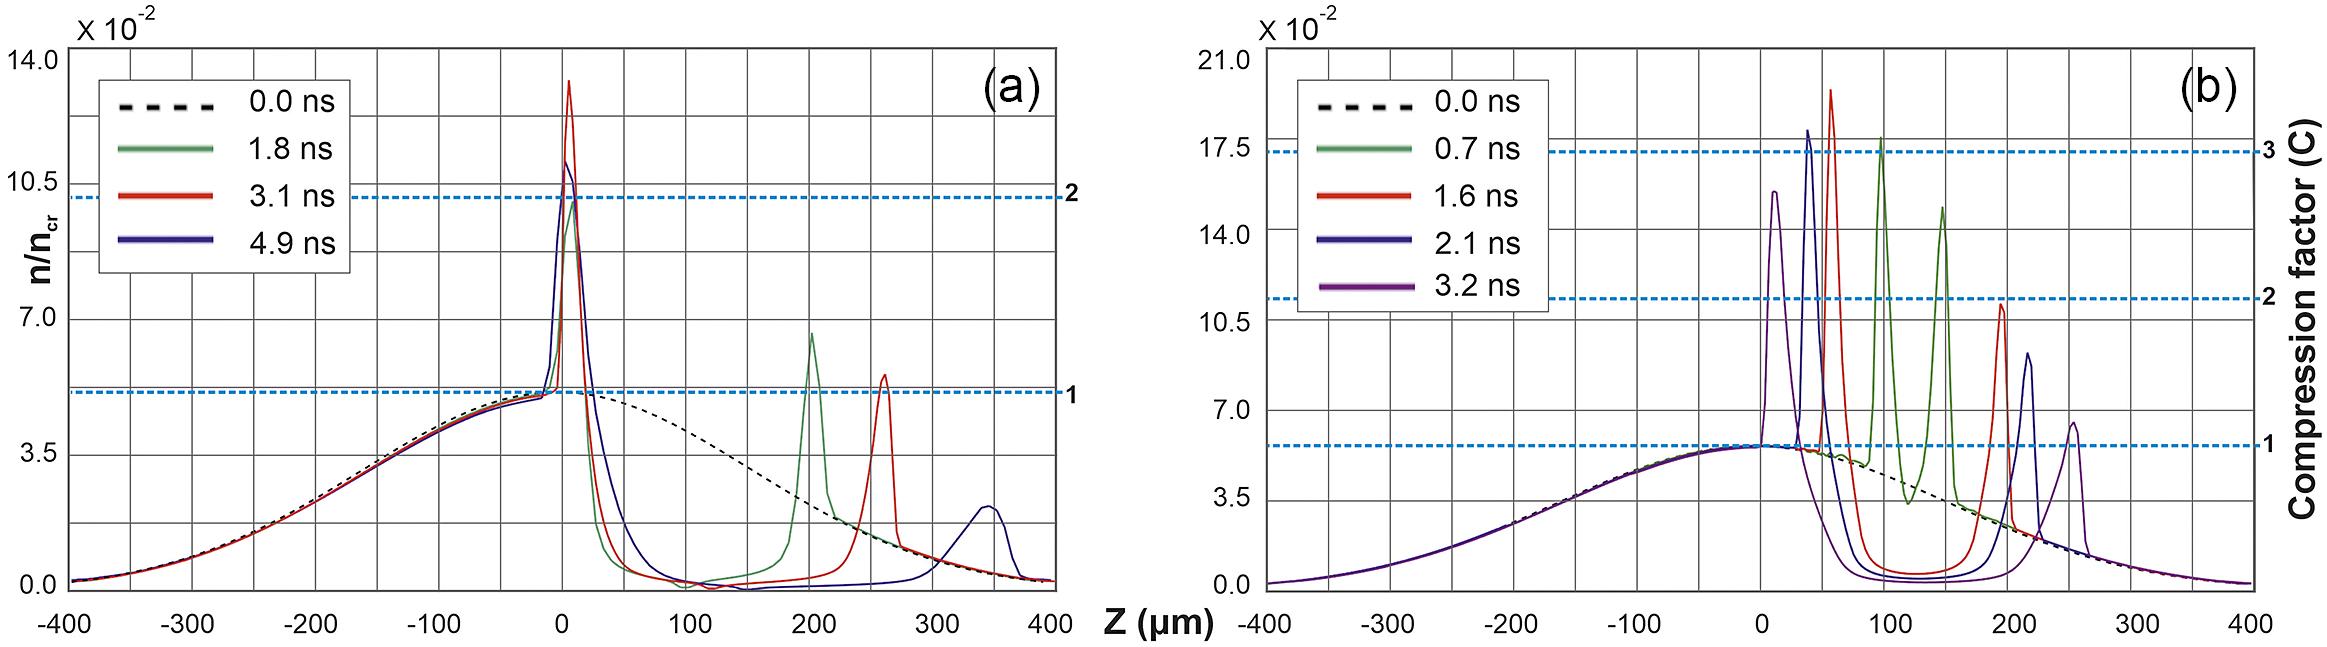 The H density profile lineouts of the focused beam at Y = 250 μm, Z = 100, 120 and 150 μm at t = 1.8, 3.1 and 4.9 ns, respectively, when the shock front reaches the centre of the gas-jet (a). Lineouts of the H density evolution at Y = 200 μm and Z = 120 μm, where the compression of the BW front is maximized at t = 1.6 ns (b).